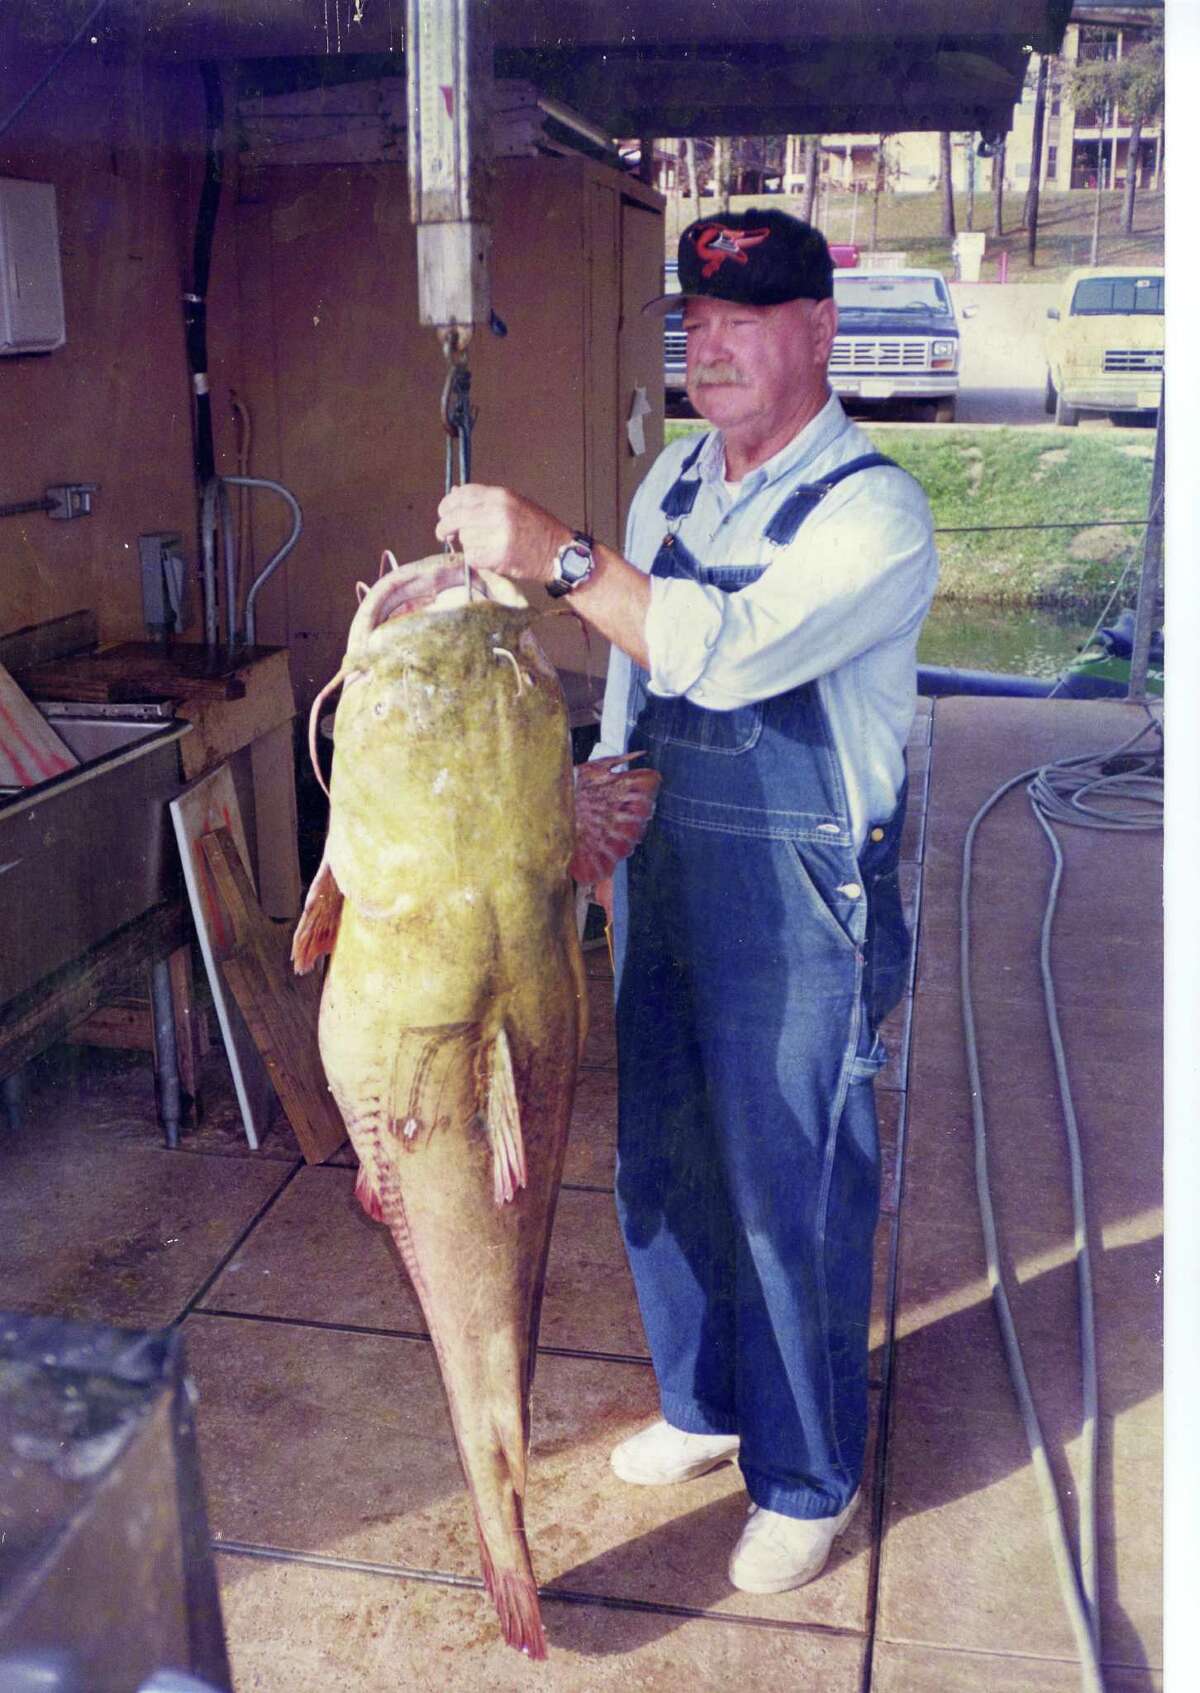 Texas record for freshwater, flathead catfish is 98.5 pounds, caught by James Laster at Lake Palestine December 2, 1998.